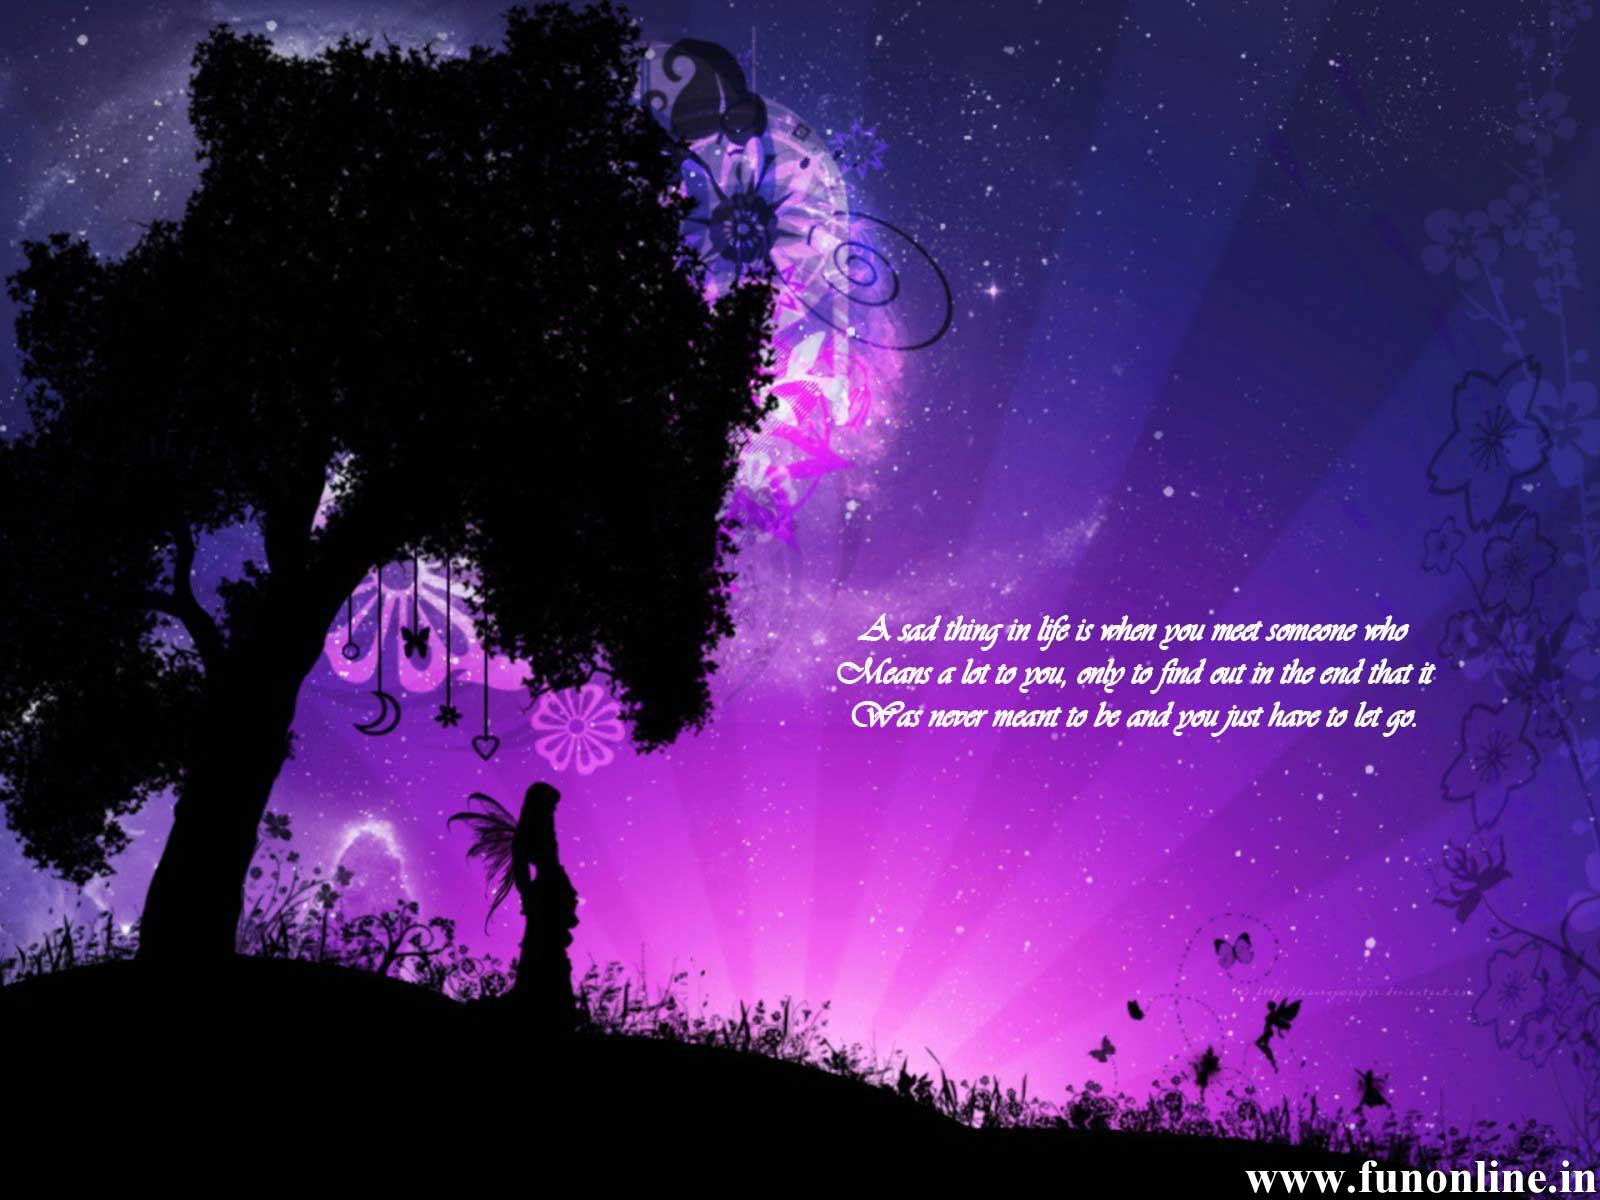 A tree with the moon and stars in front of it - Sad quotes